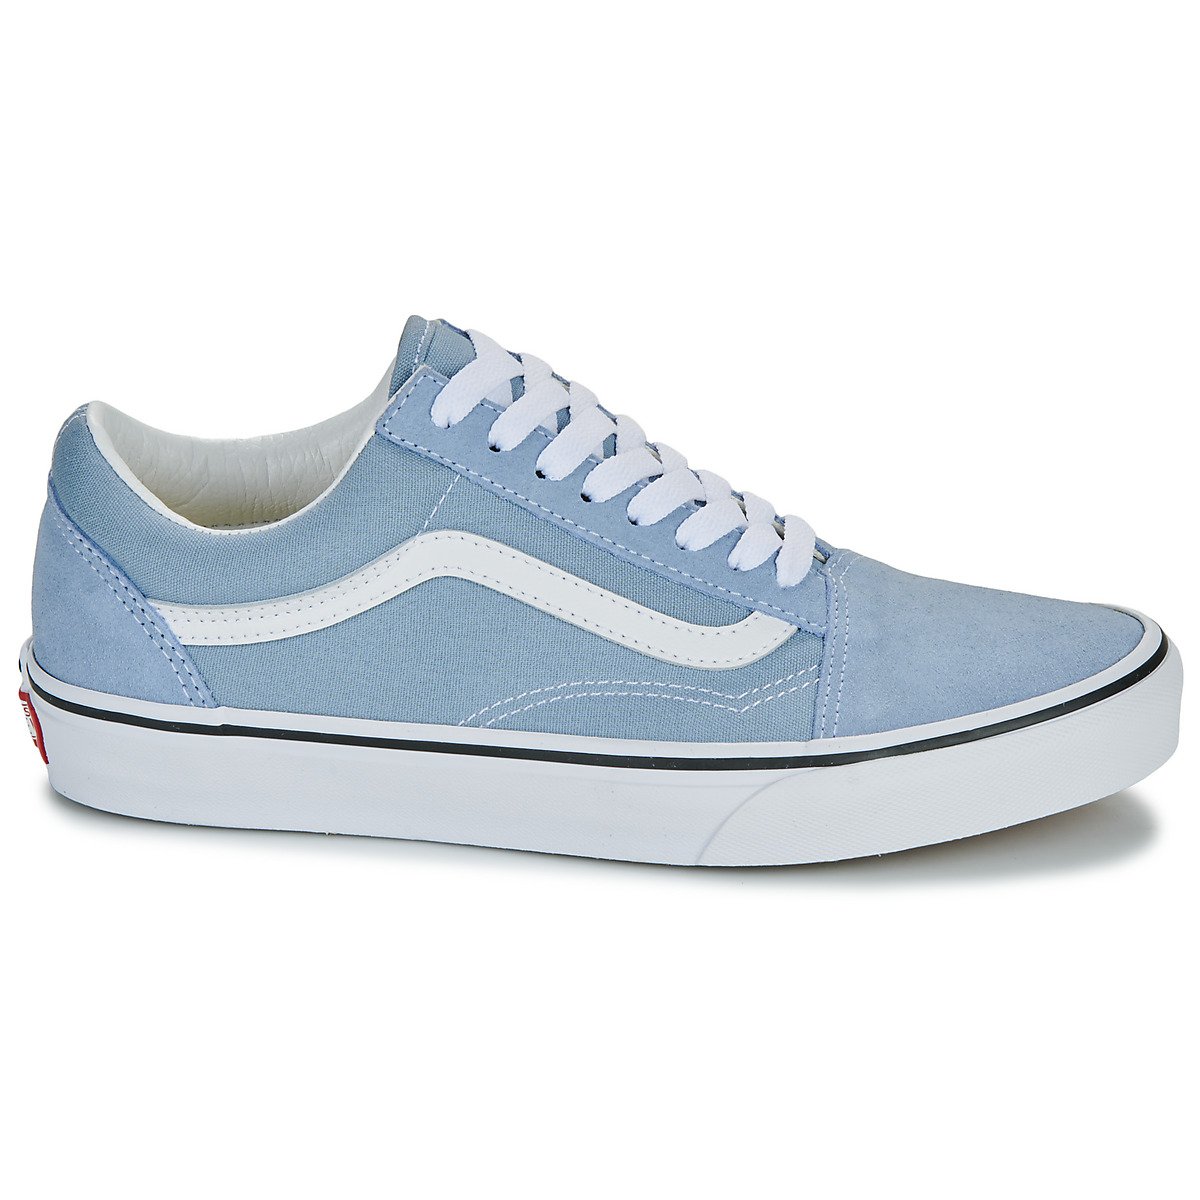 (Trainers) Old Skool COLOR THEORY DUSTY BLUE